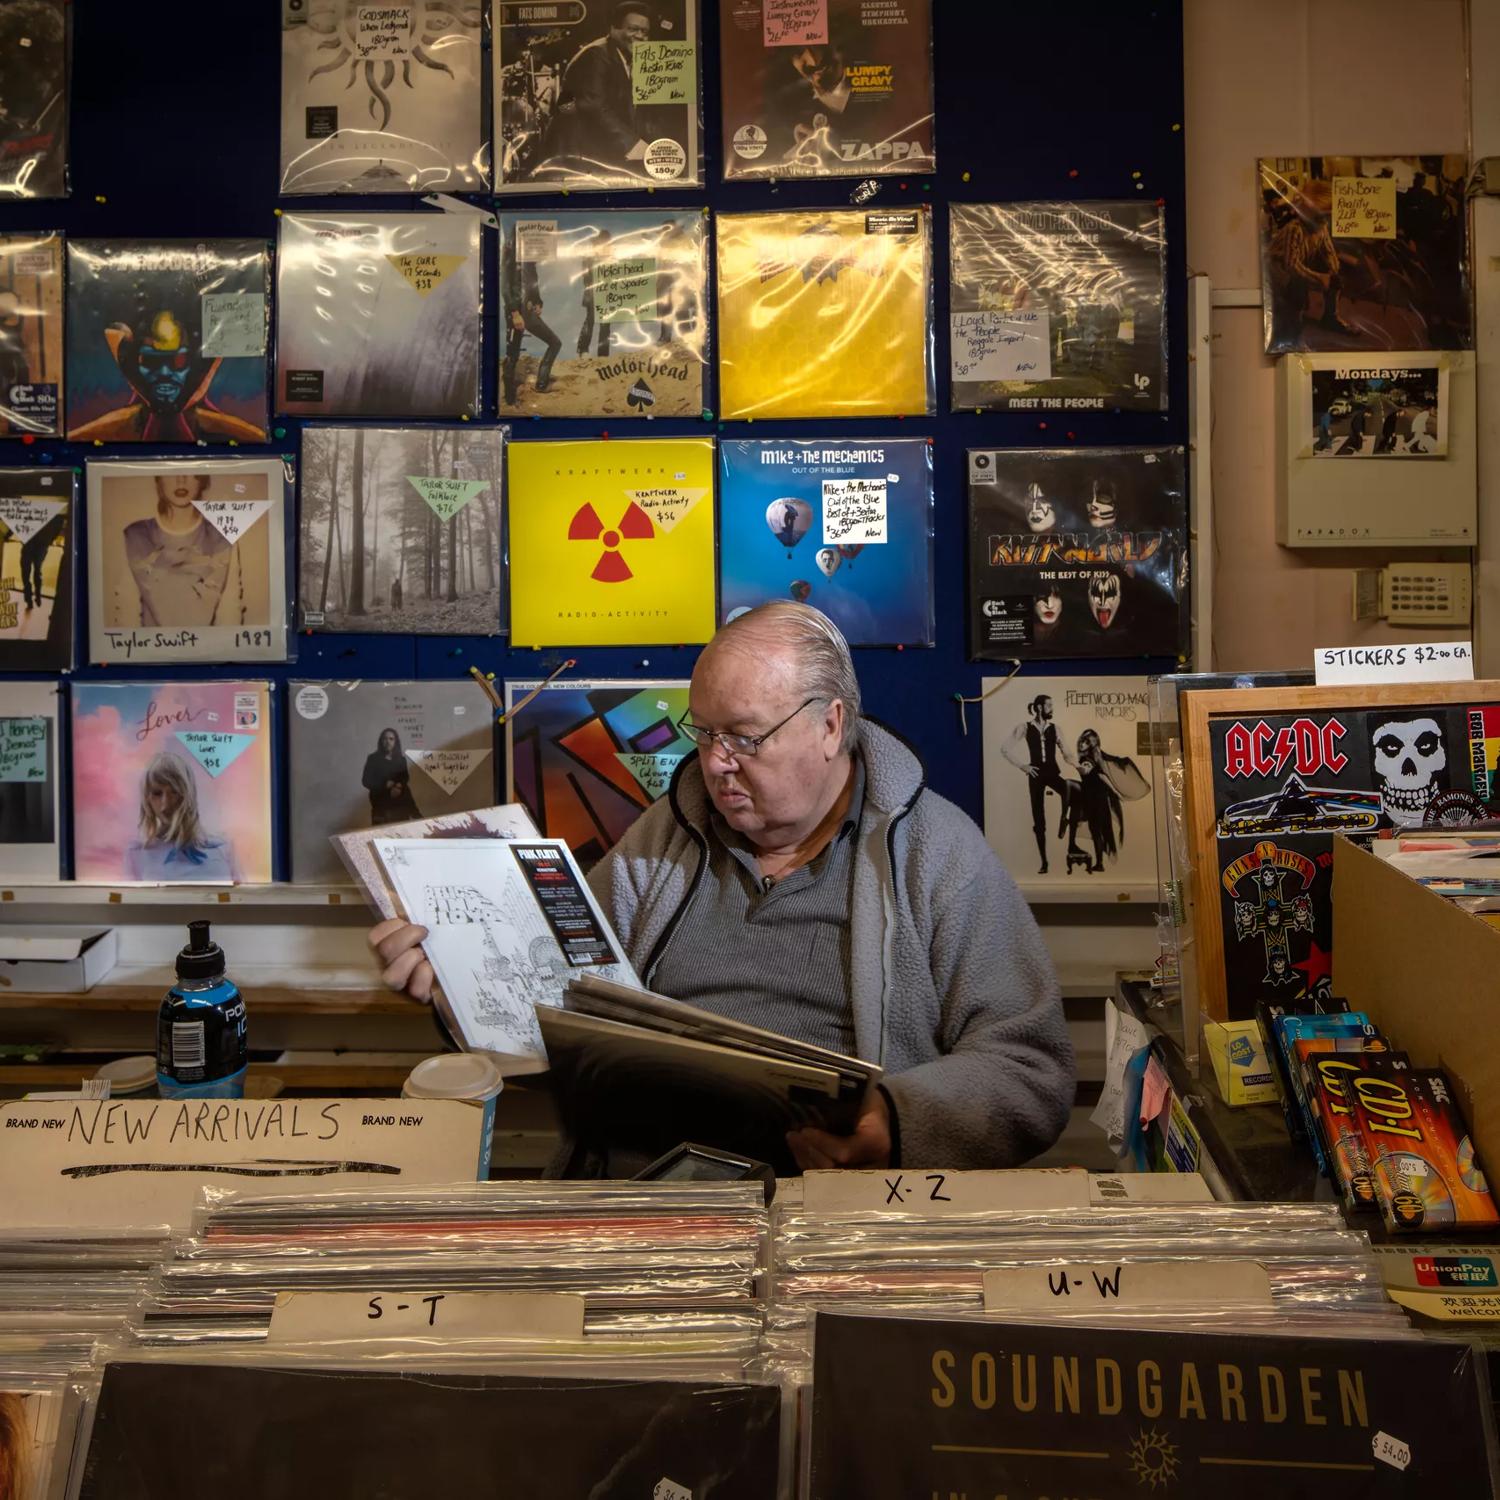 A man sits behind the counter looking through a stack of vinyls at Lo-Cost / Moonhop, a music store in Petone, Lower Hutt, New Zealand. 